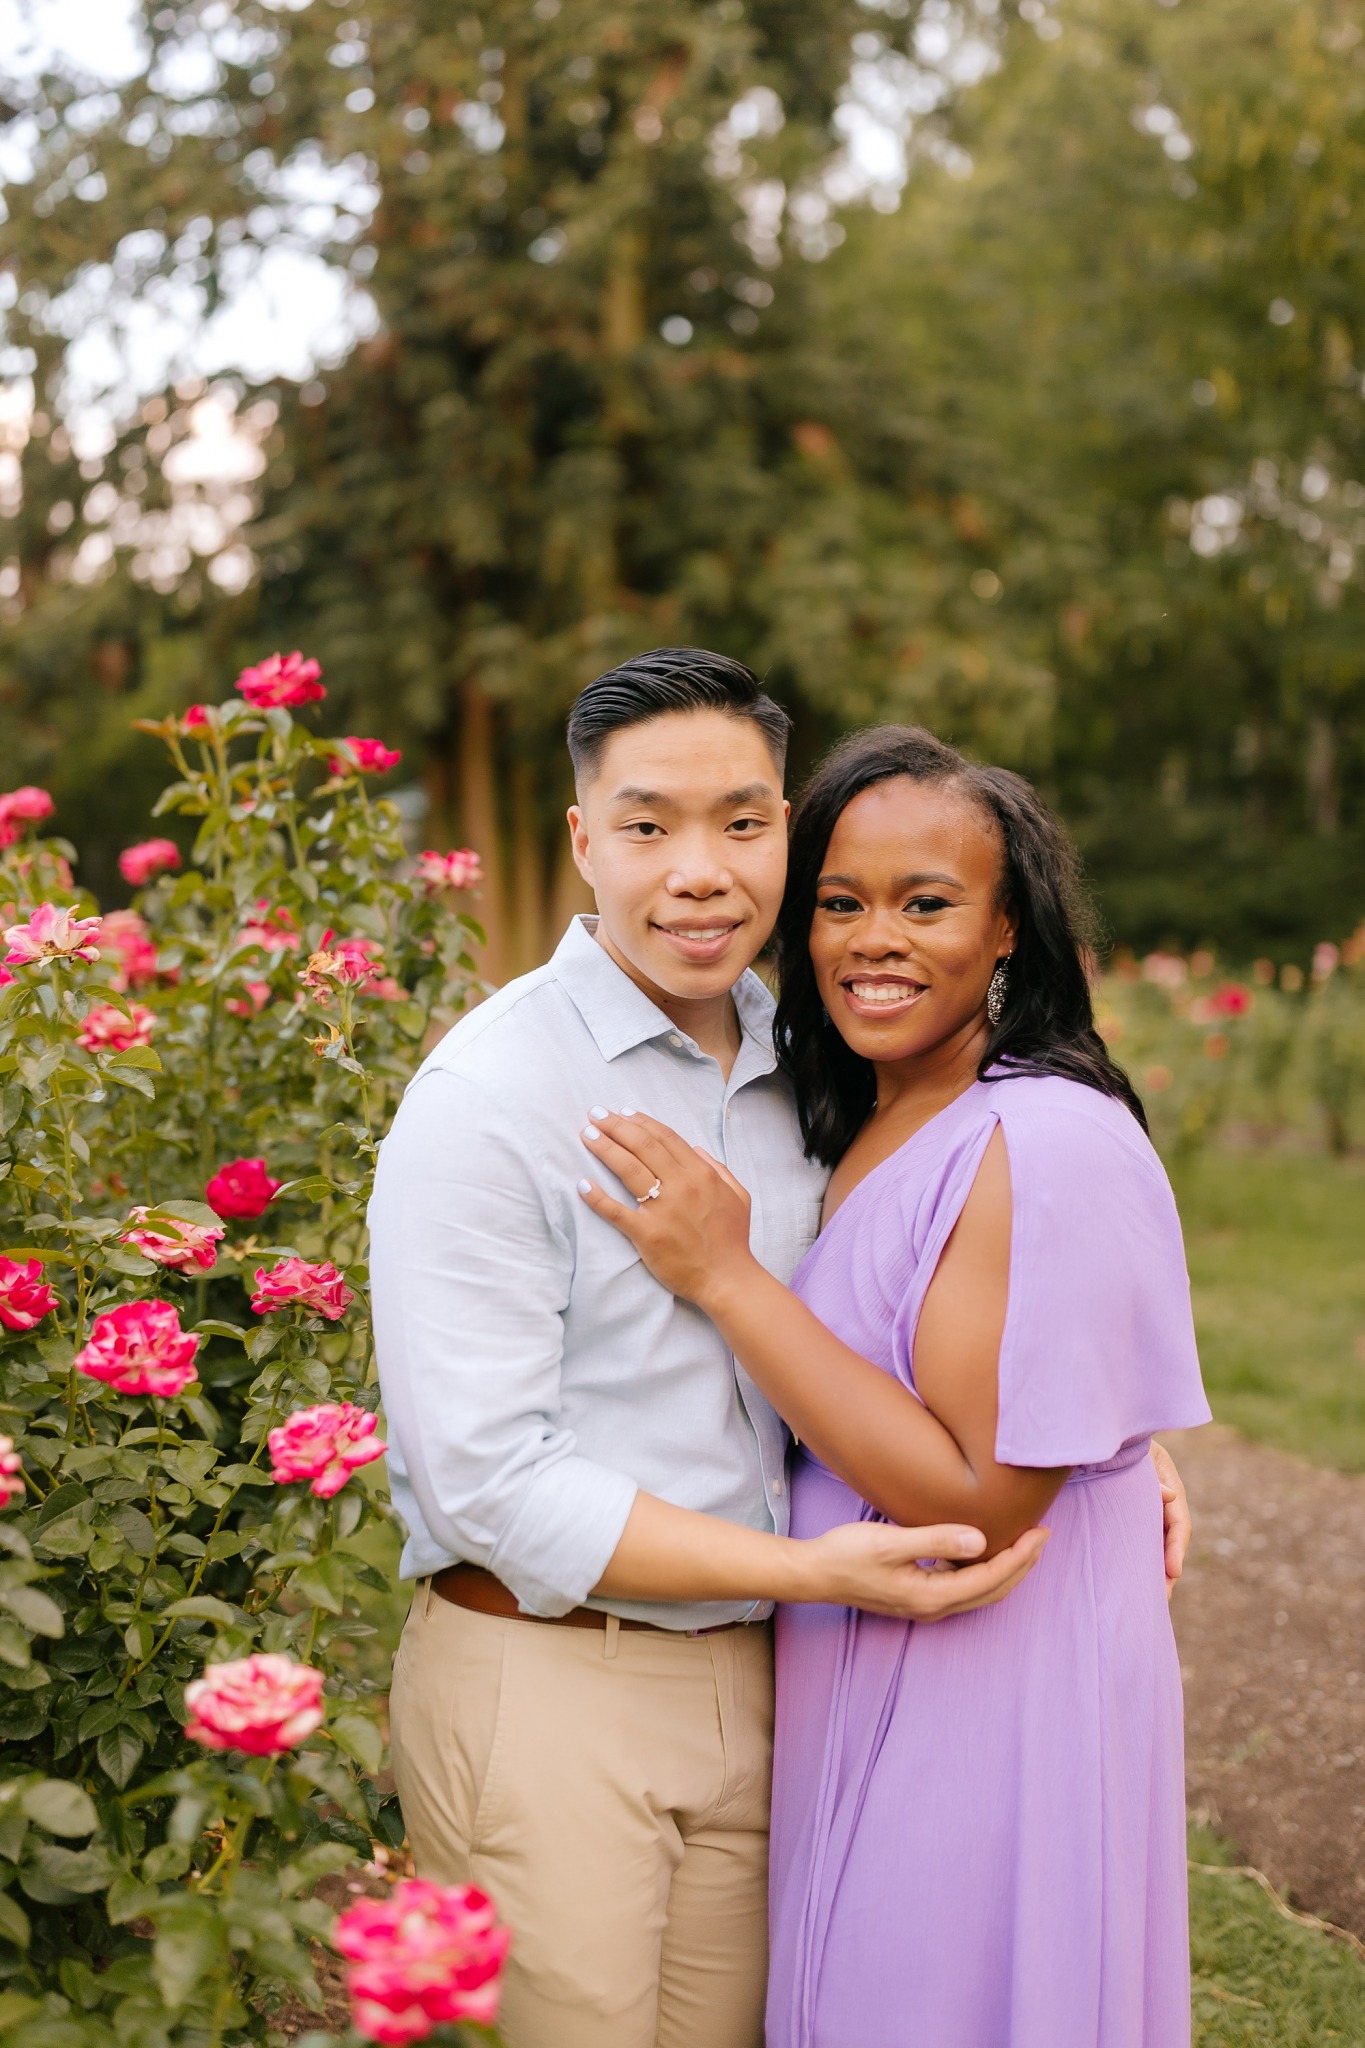 Dreamy Green Spring Gardens Park Engagement Session - Alexandria, Virginia  - Delaney and Christian — Northern Virginia Wedding Photographer Beauty of  the Soul Studio